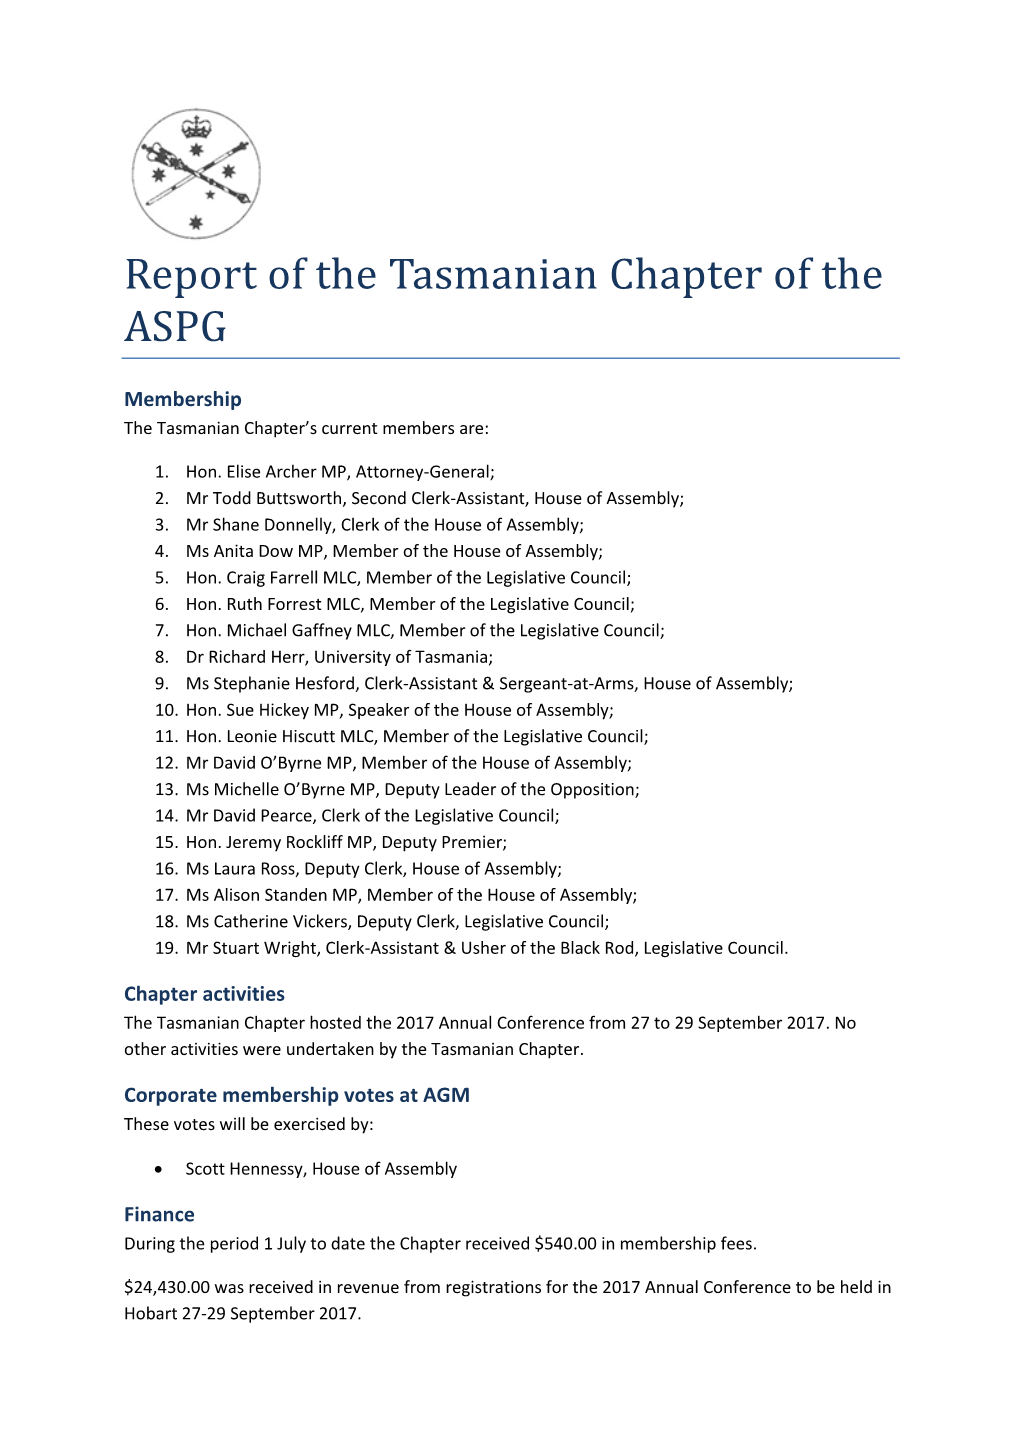 Report of the Tasmanian Chapter of the ASPG